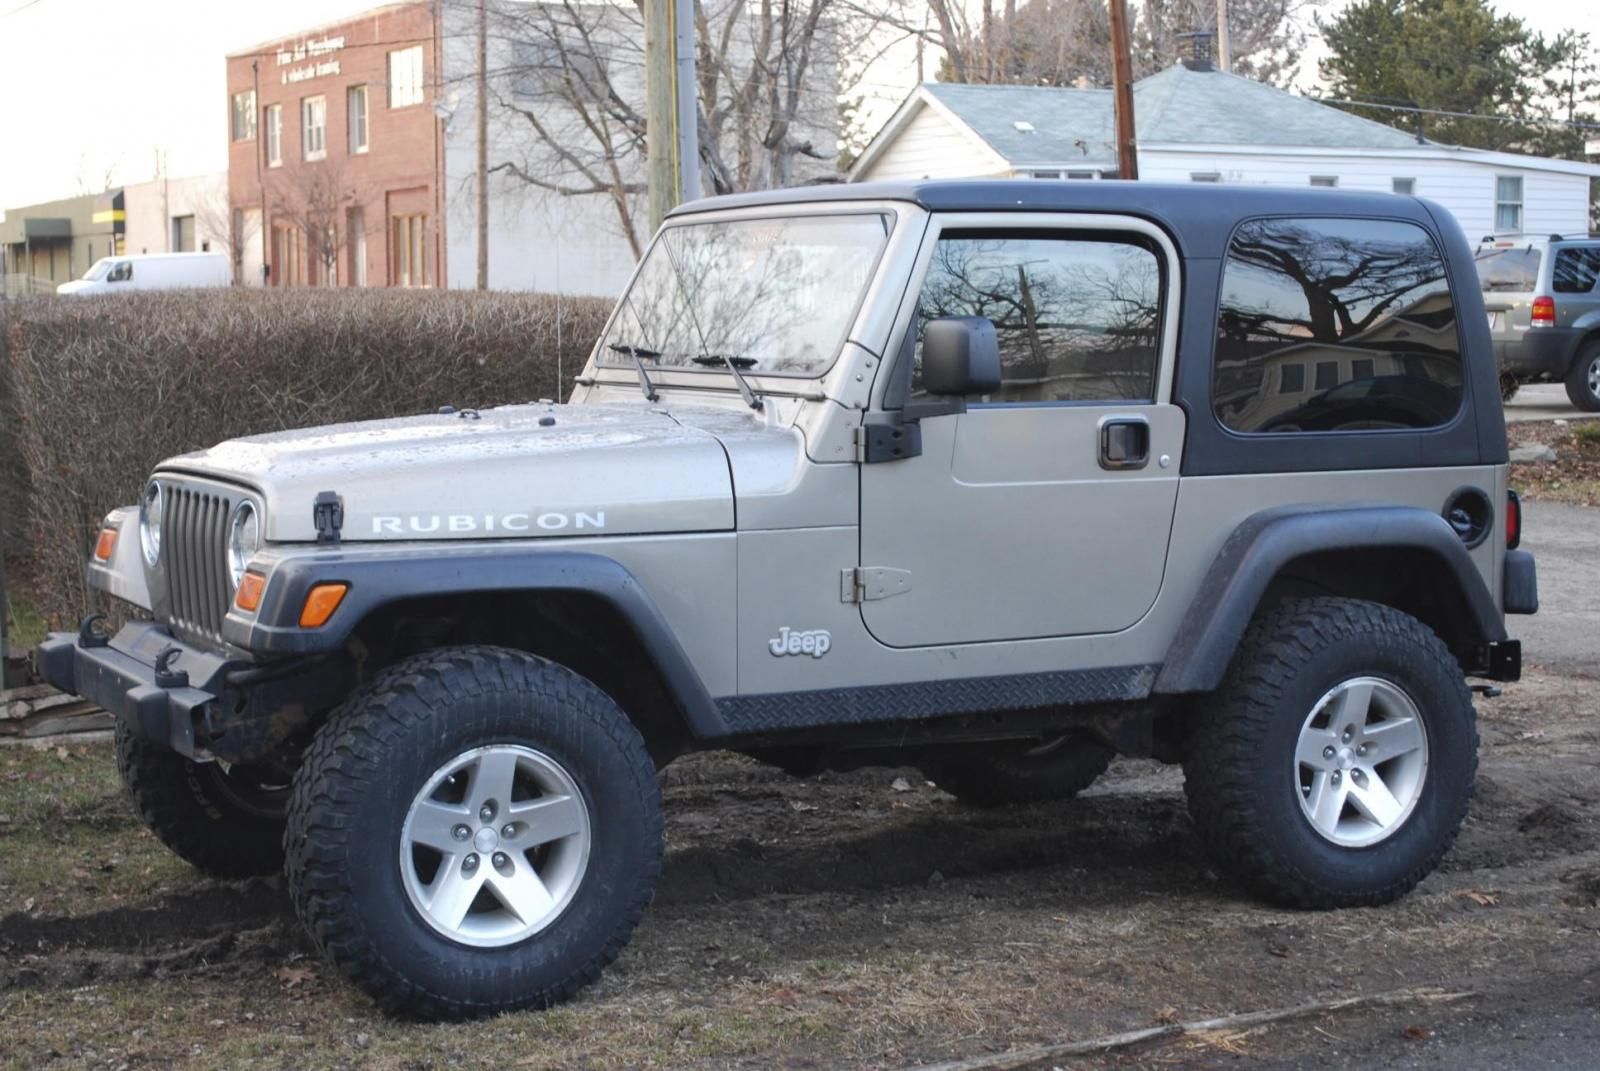 2003 Jeep Wrangler Rubicon 0-60 Times, Top Speed, Specs, Quarter Mile, and  Wallpapers - MyCarSpecs United States / USA